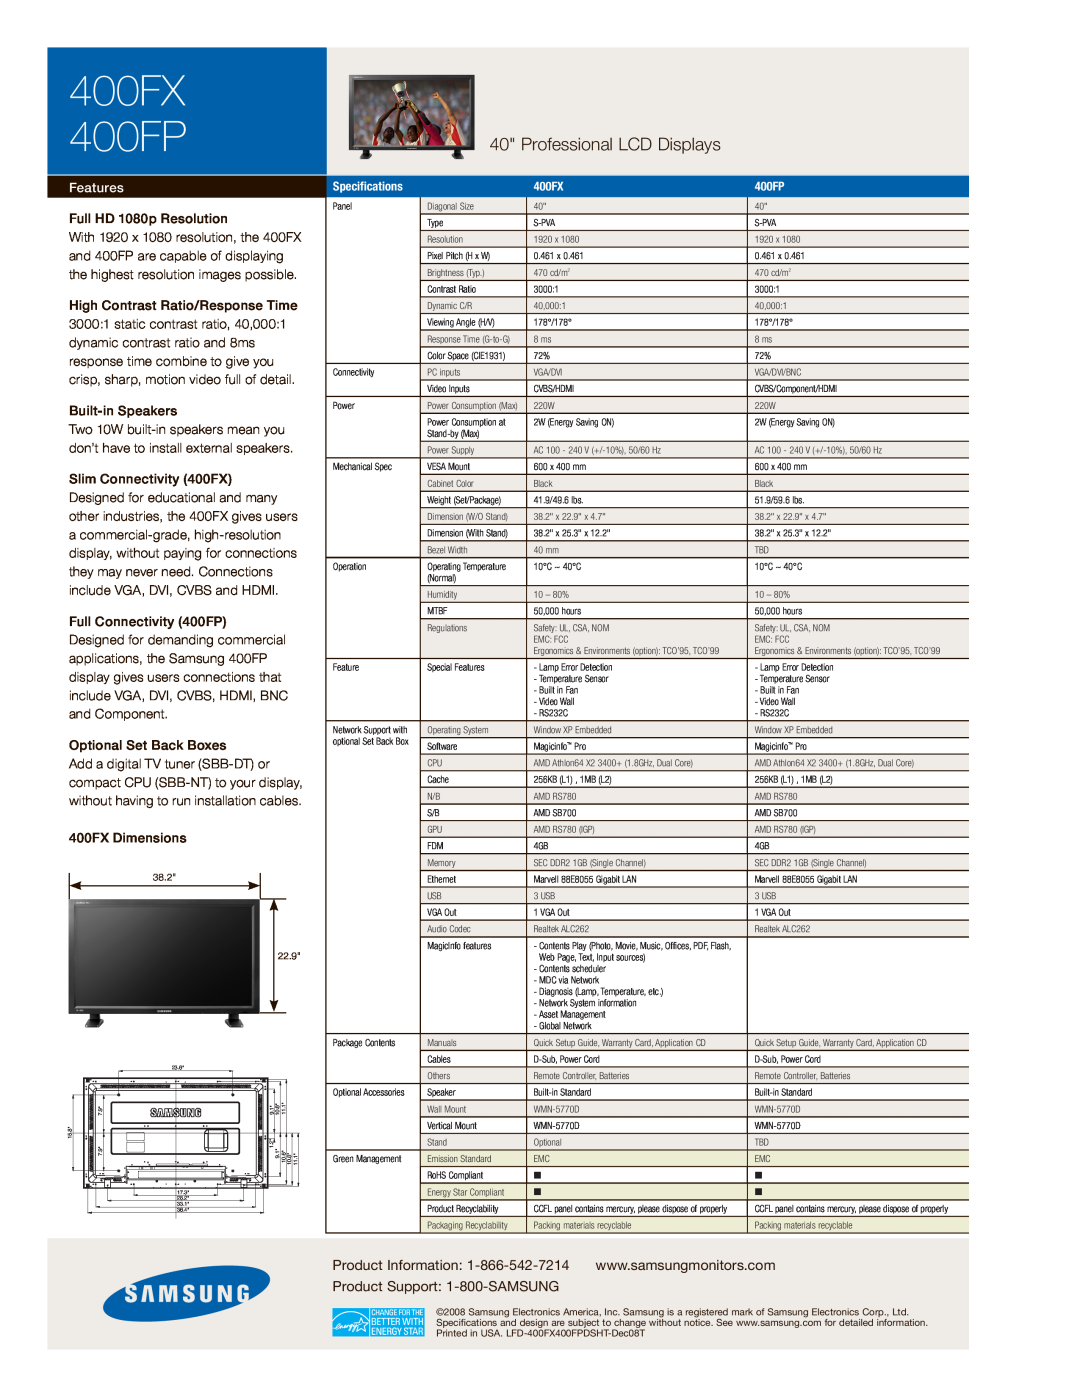 Samsung manual 400FX 400FP, Professional LCD Displays, Product Information, Product Support 1-800-SAMSUNG, Features 